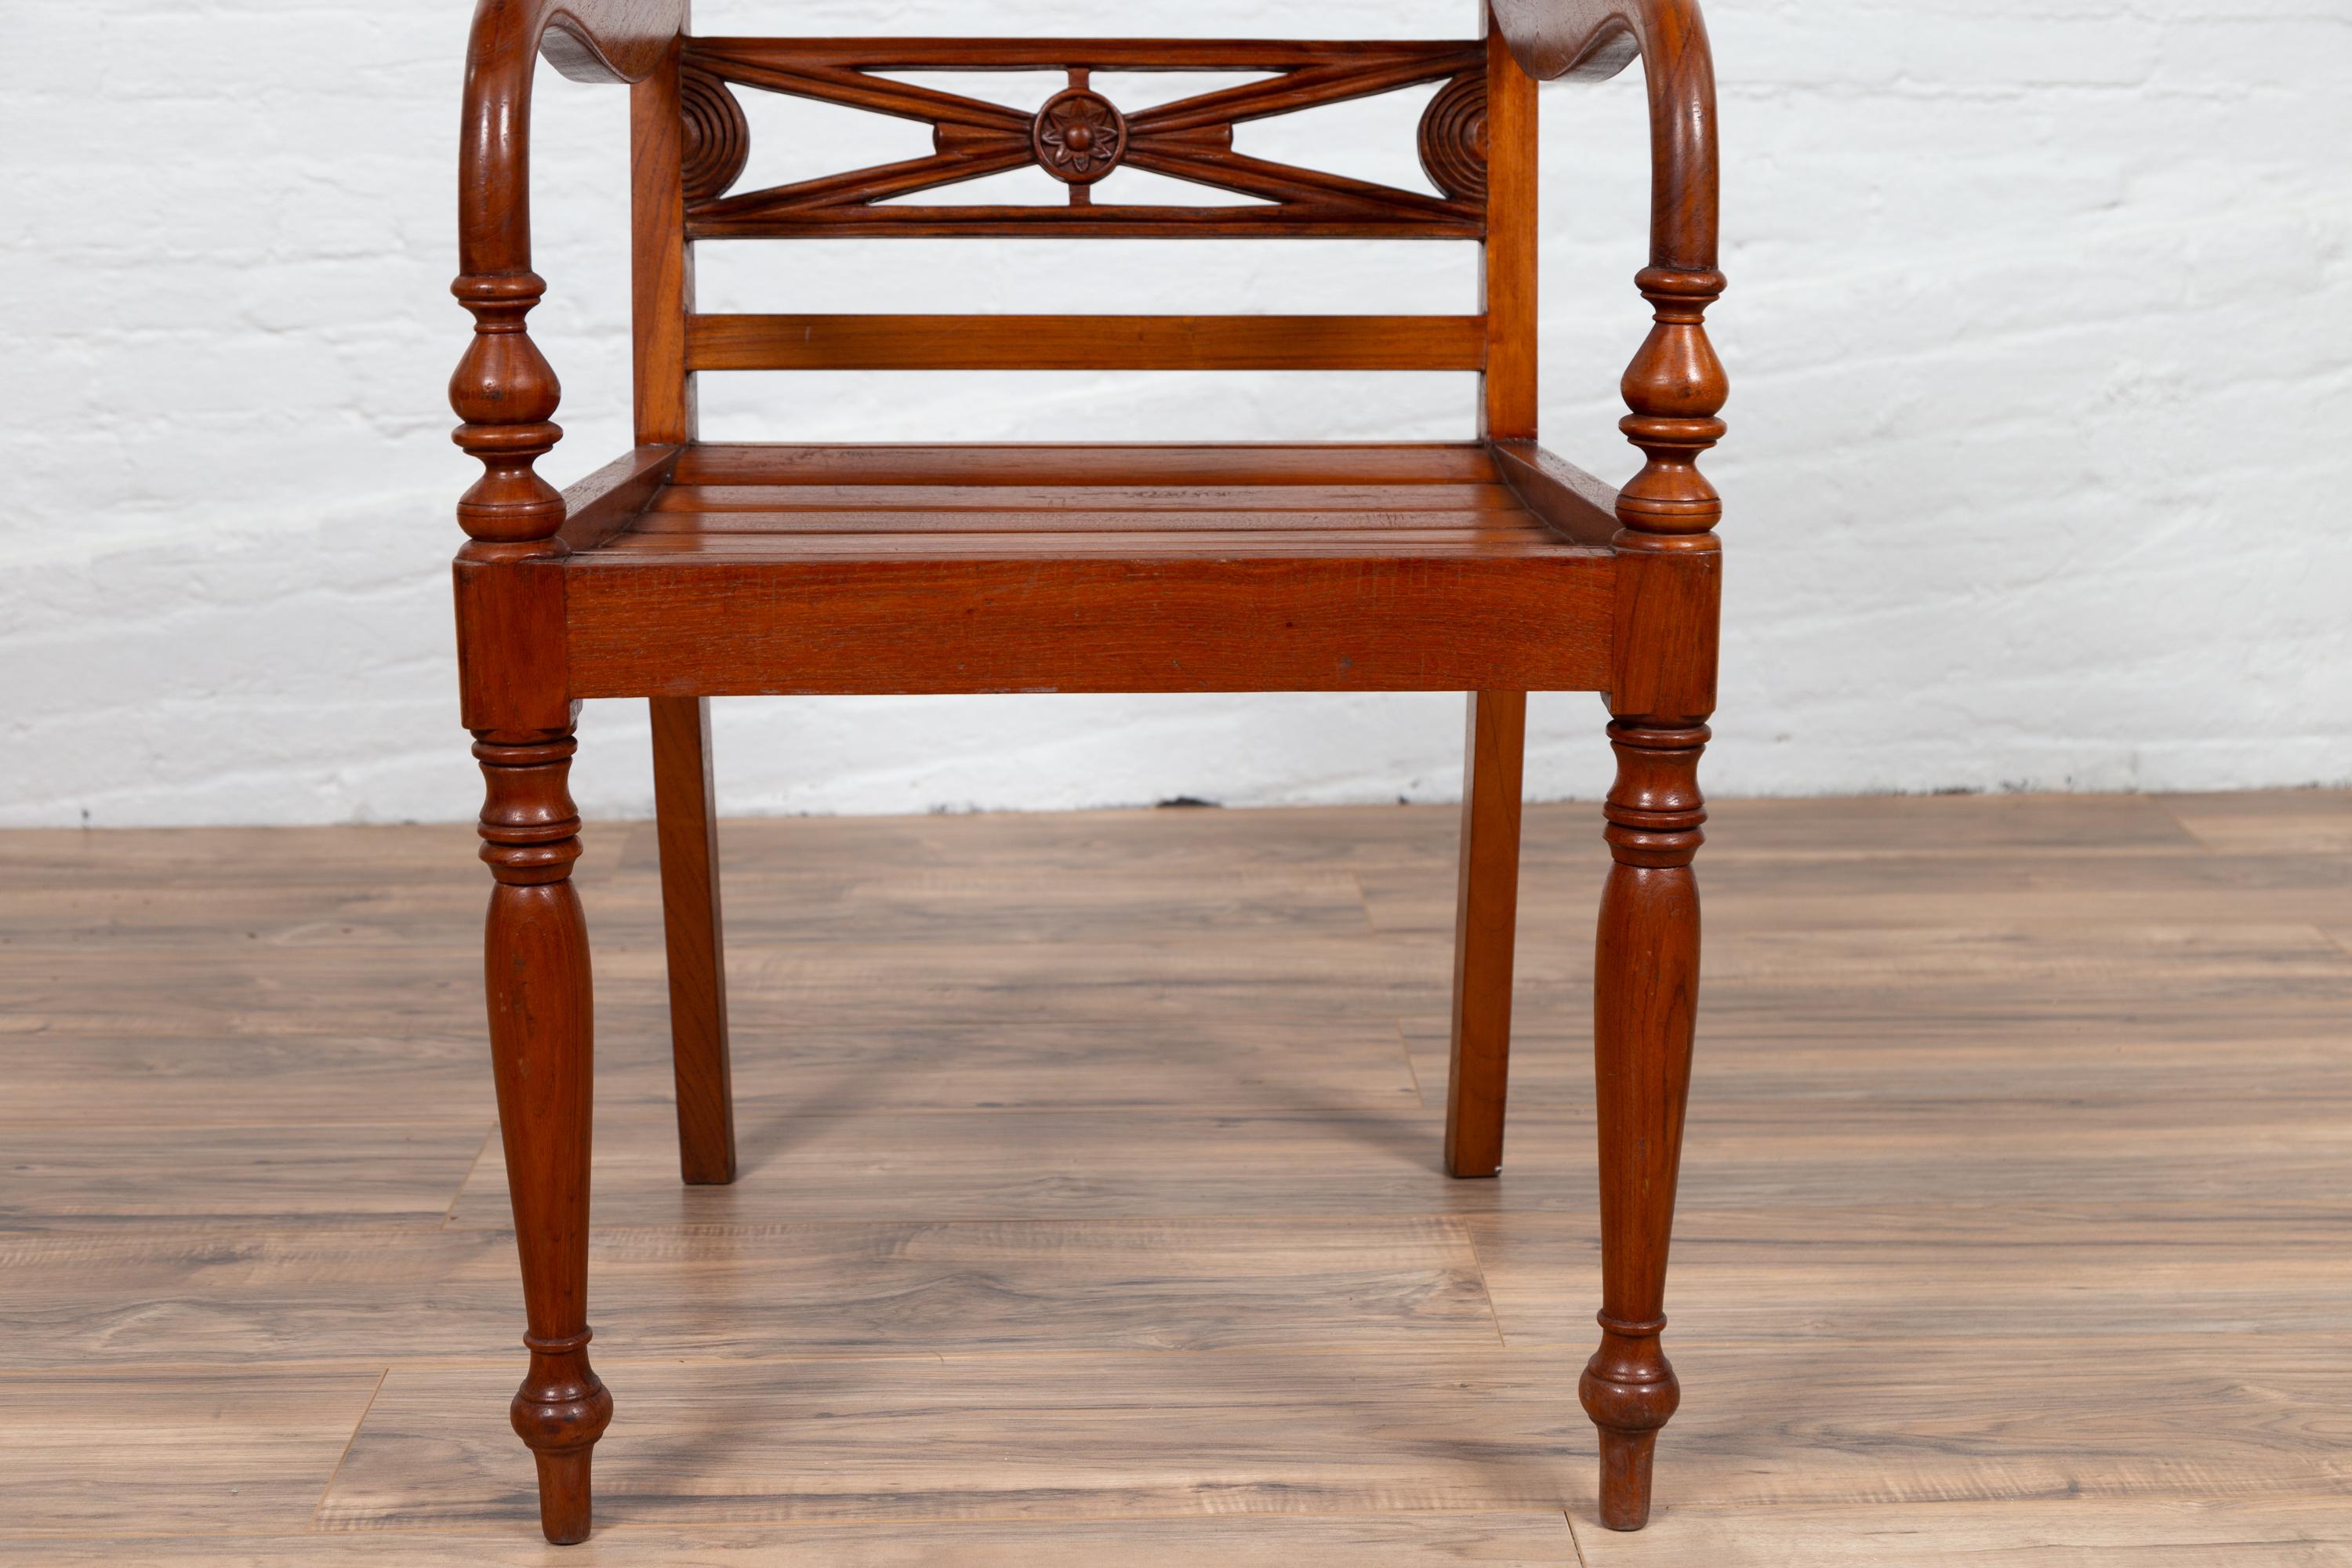 Early 20th Century Captain's Chair from Bali with Slatted Wood and Loop Arms In Good Condition For Sale In Yonkers, NY